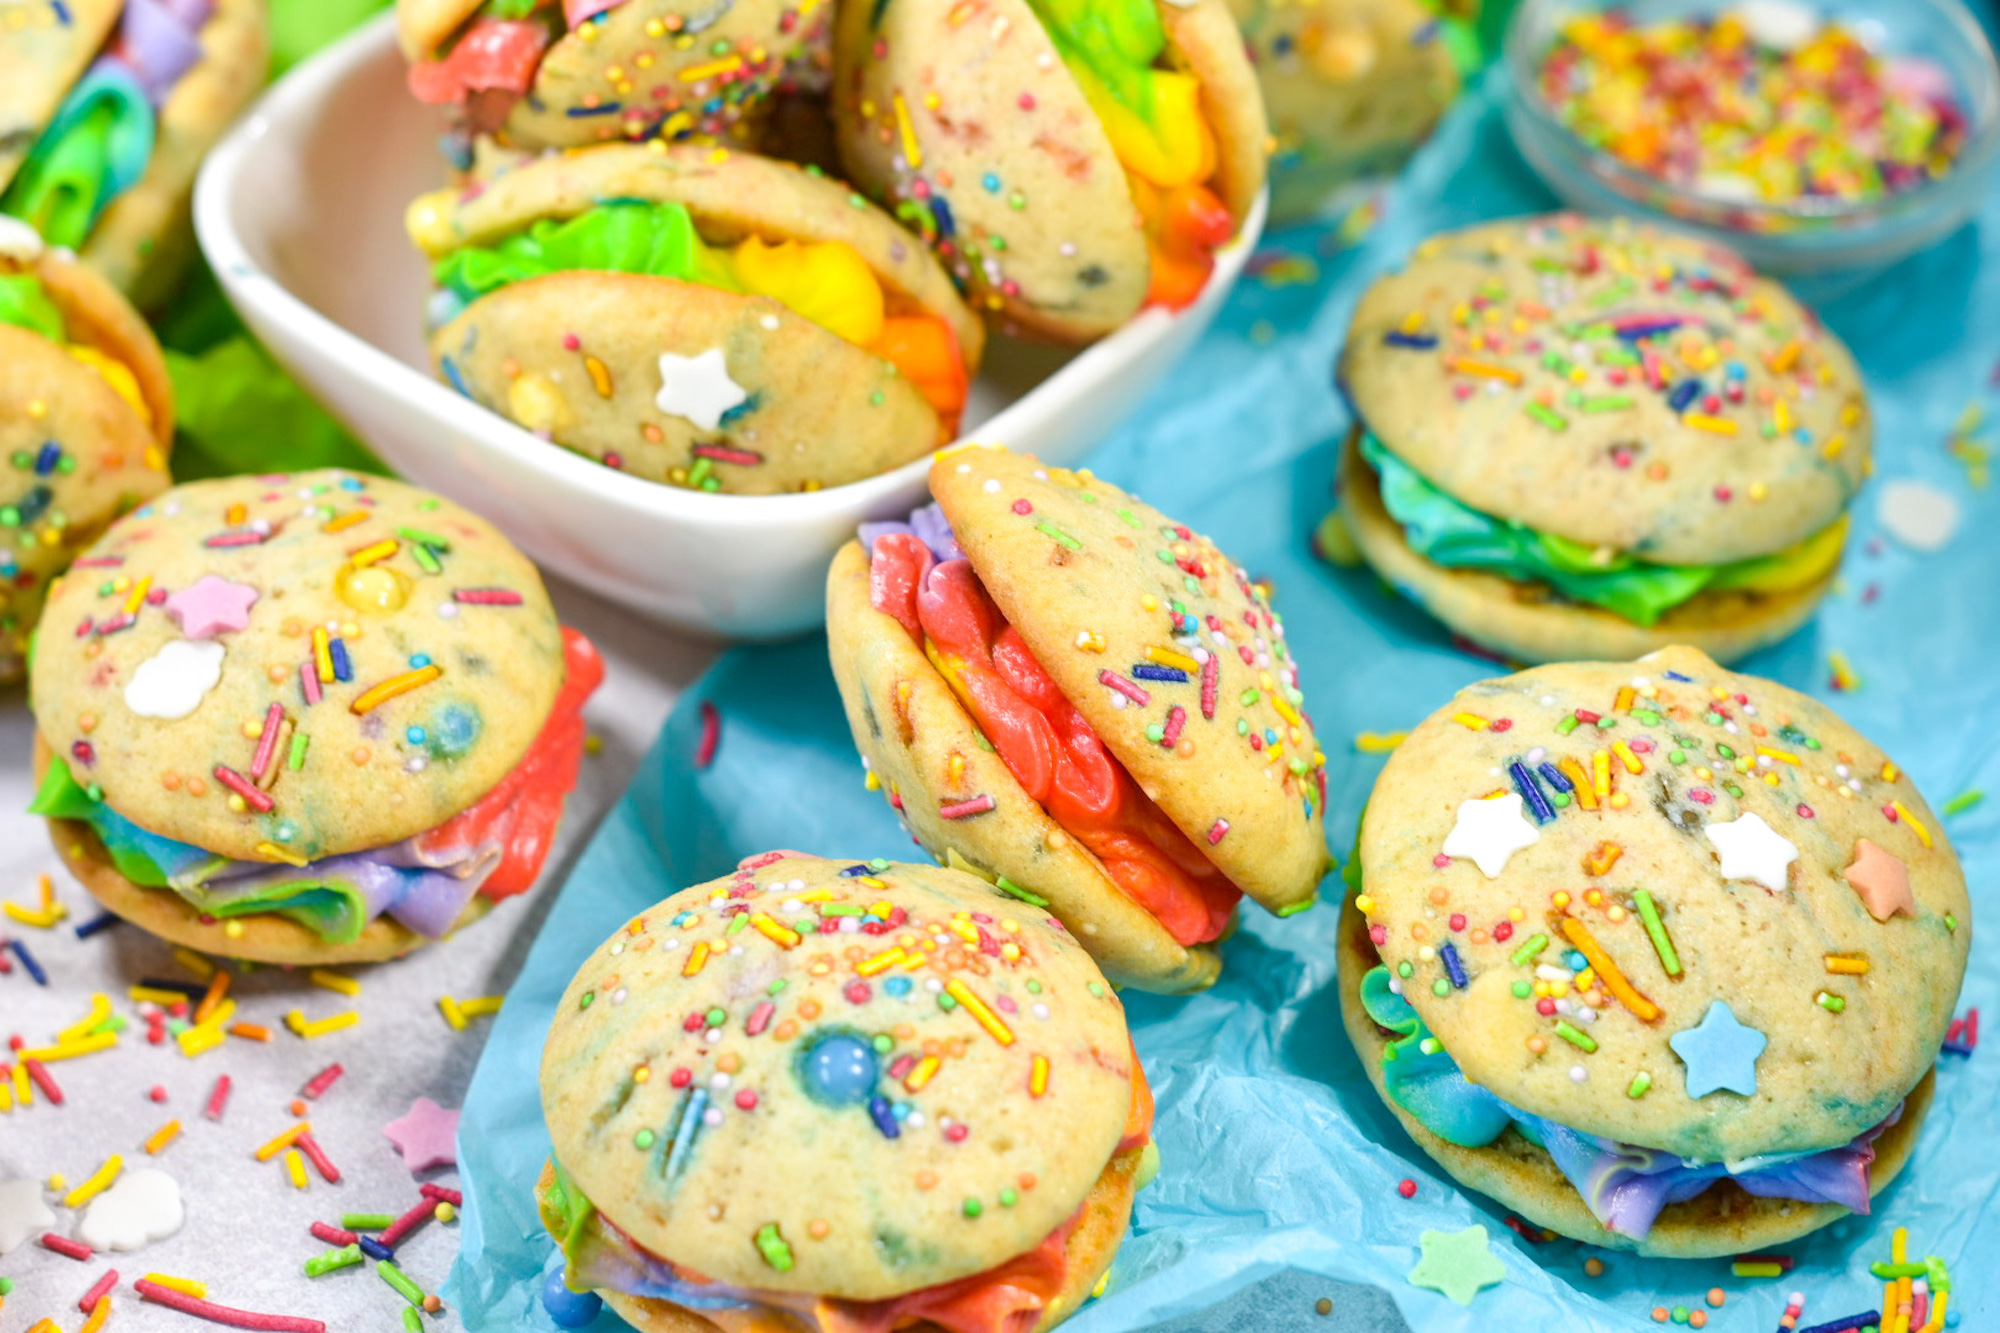 Rainbow Whoopie Pies on a sheet of blue tissue